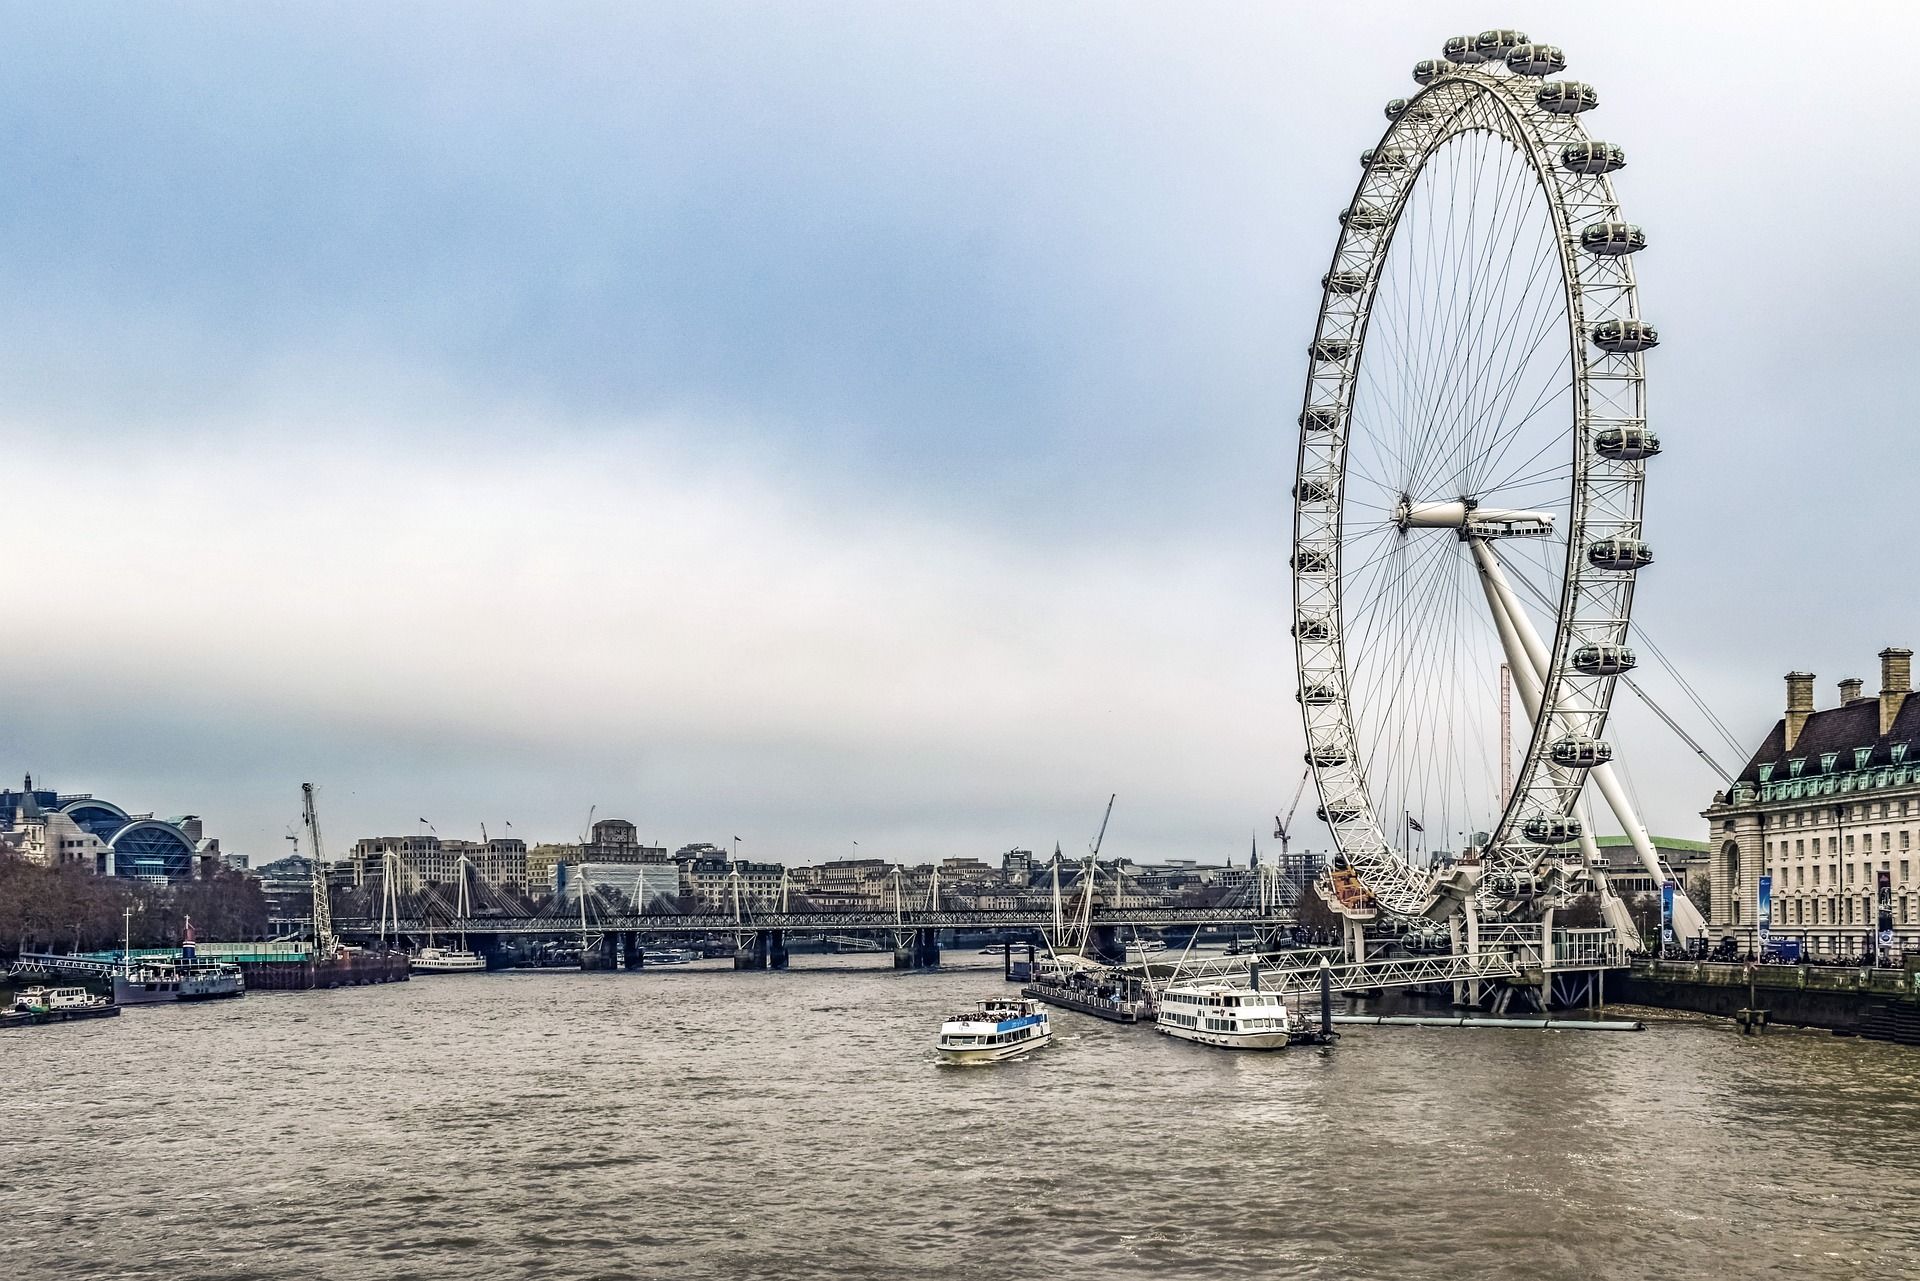 London Eye with a backdrop of a cloudy sky